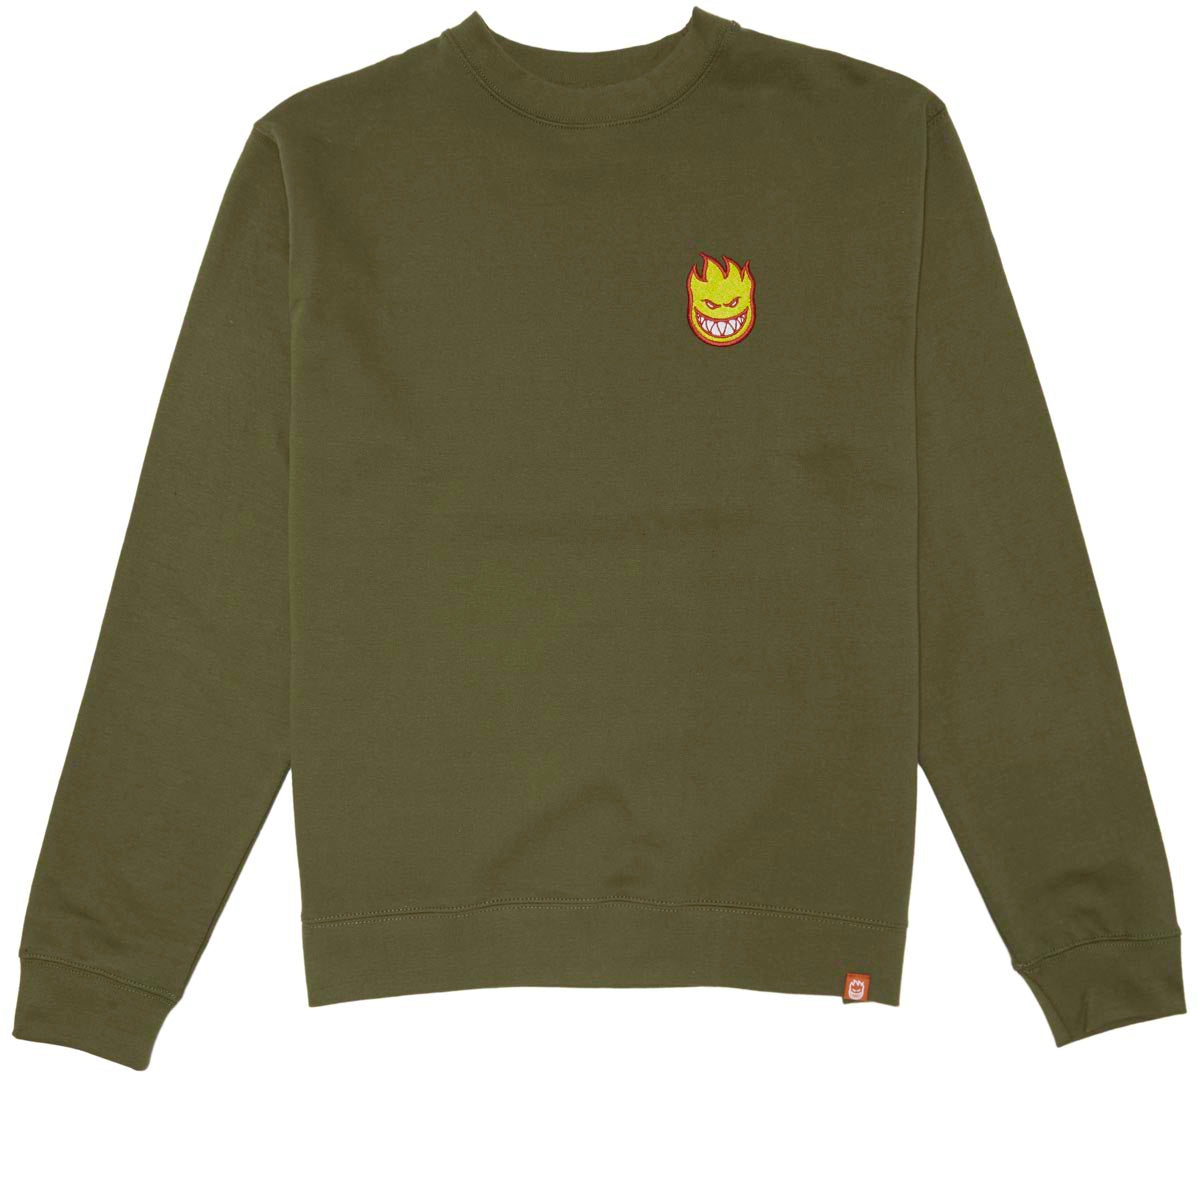 Spitfire Lil Bighead Fill Sweatshirt - Army/Red/Gold/White image 1